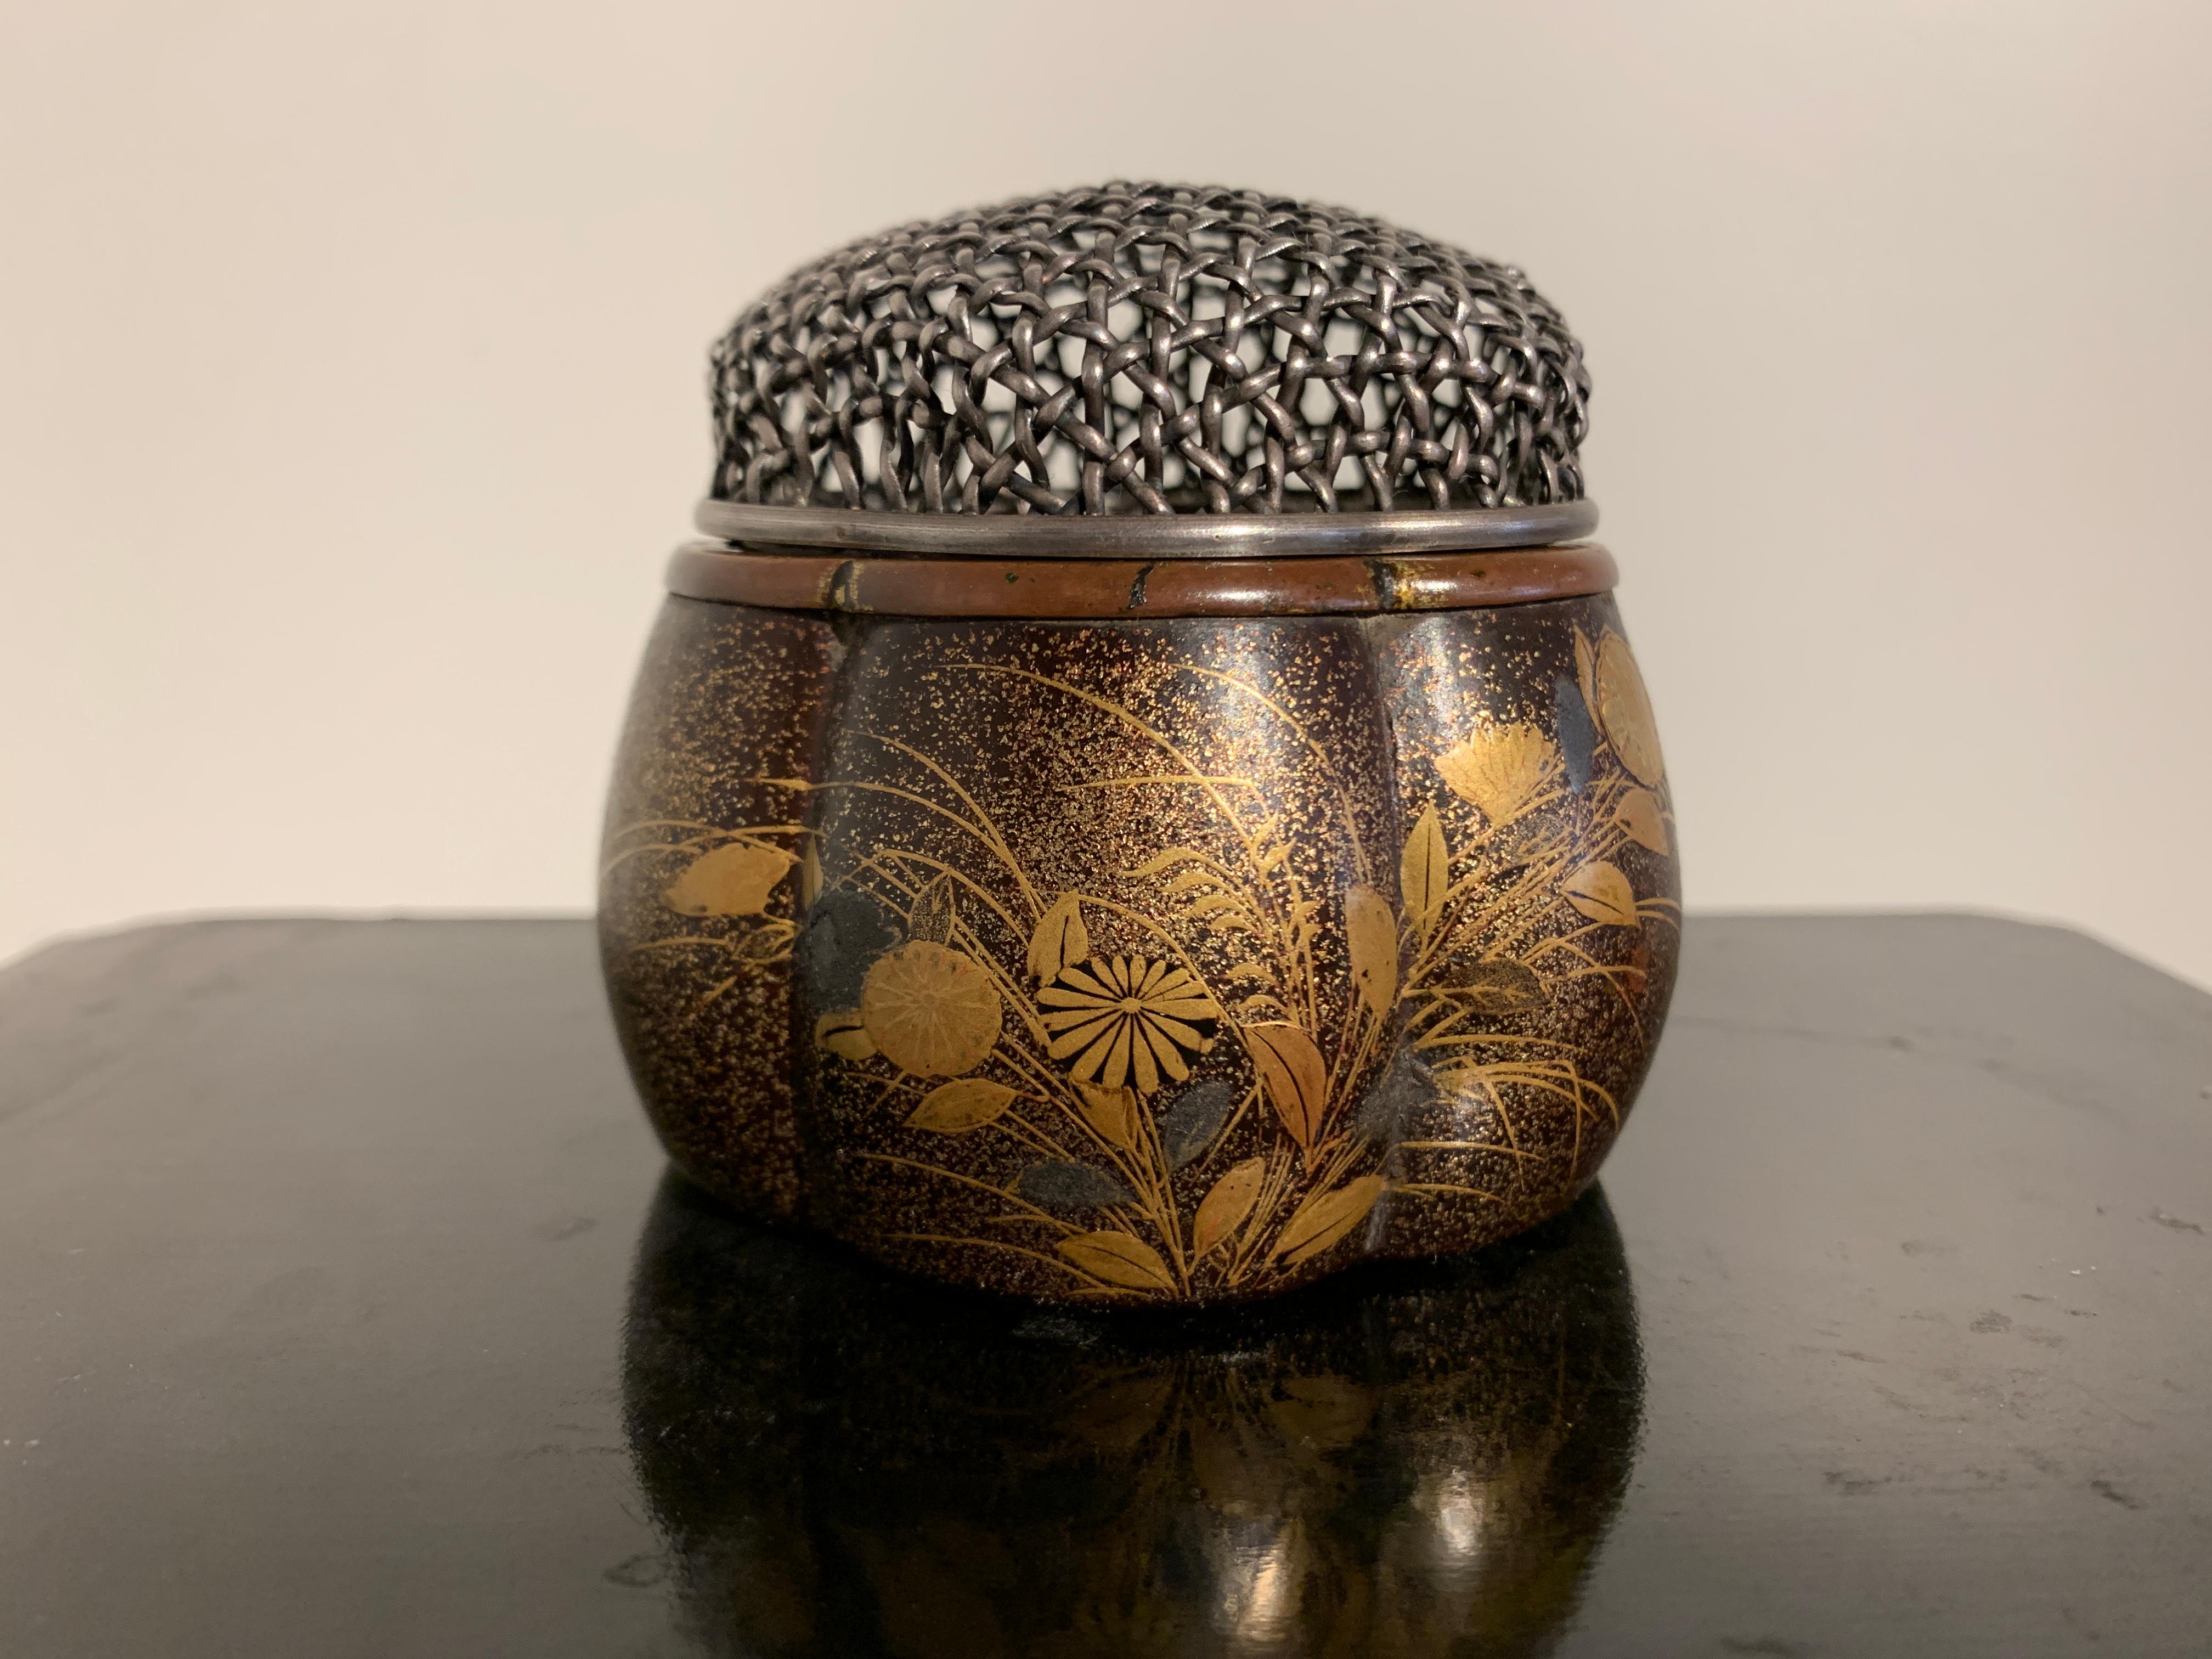 A fine and rare Japanese Momoyama Period (1573 to 1615), lobed lacquer incense burner, akoda koro, 16th-17th century, Japan.

The lobed censer, called an akoda koro (pumpkin or melon shaped incense burner), features a design of autumn grasses and